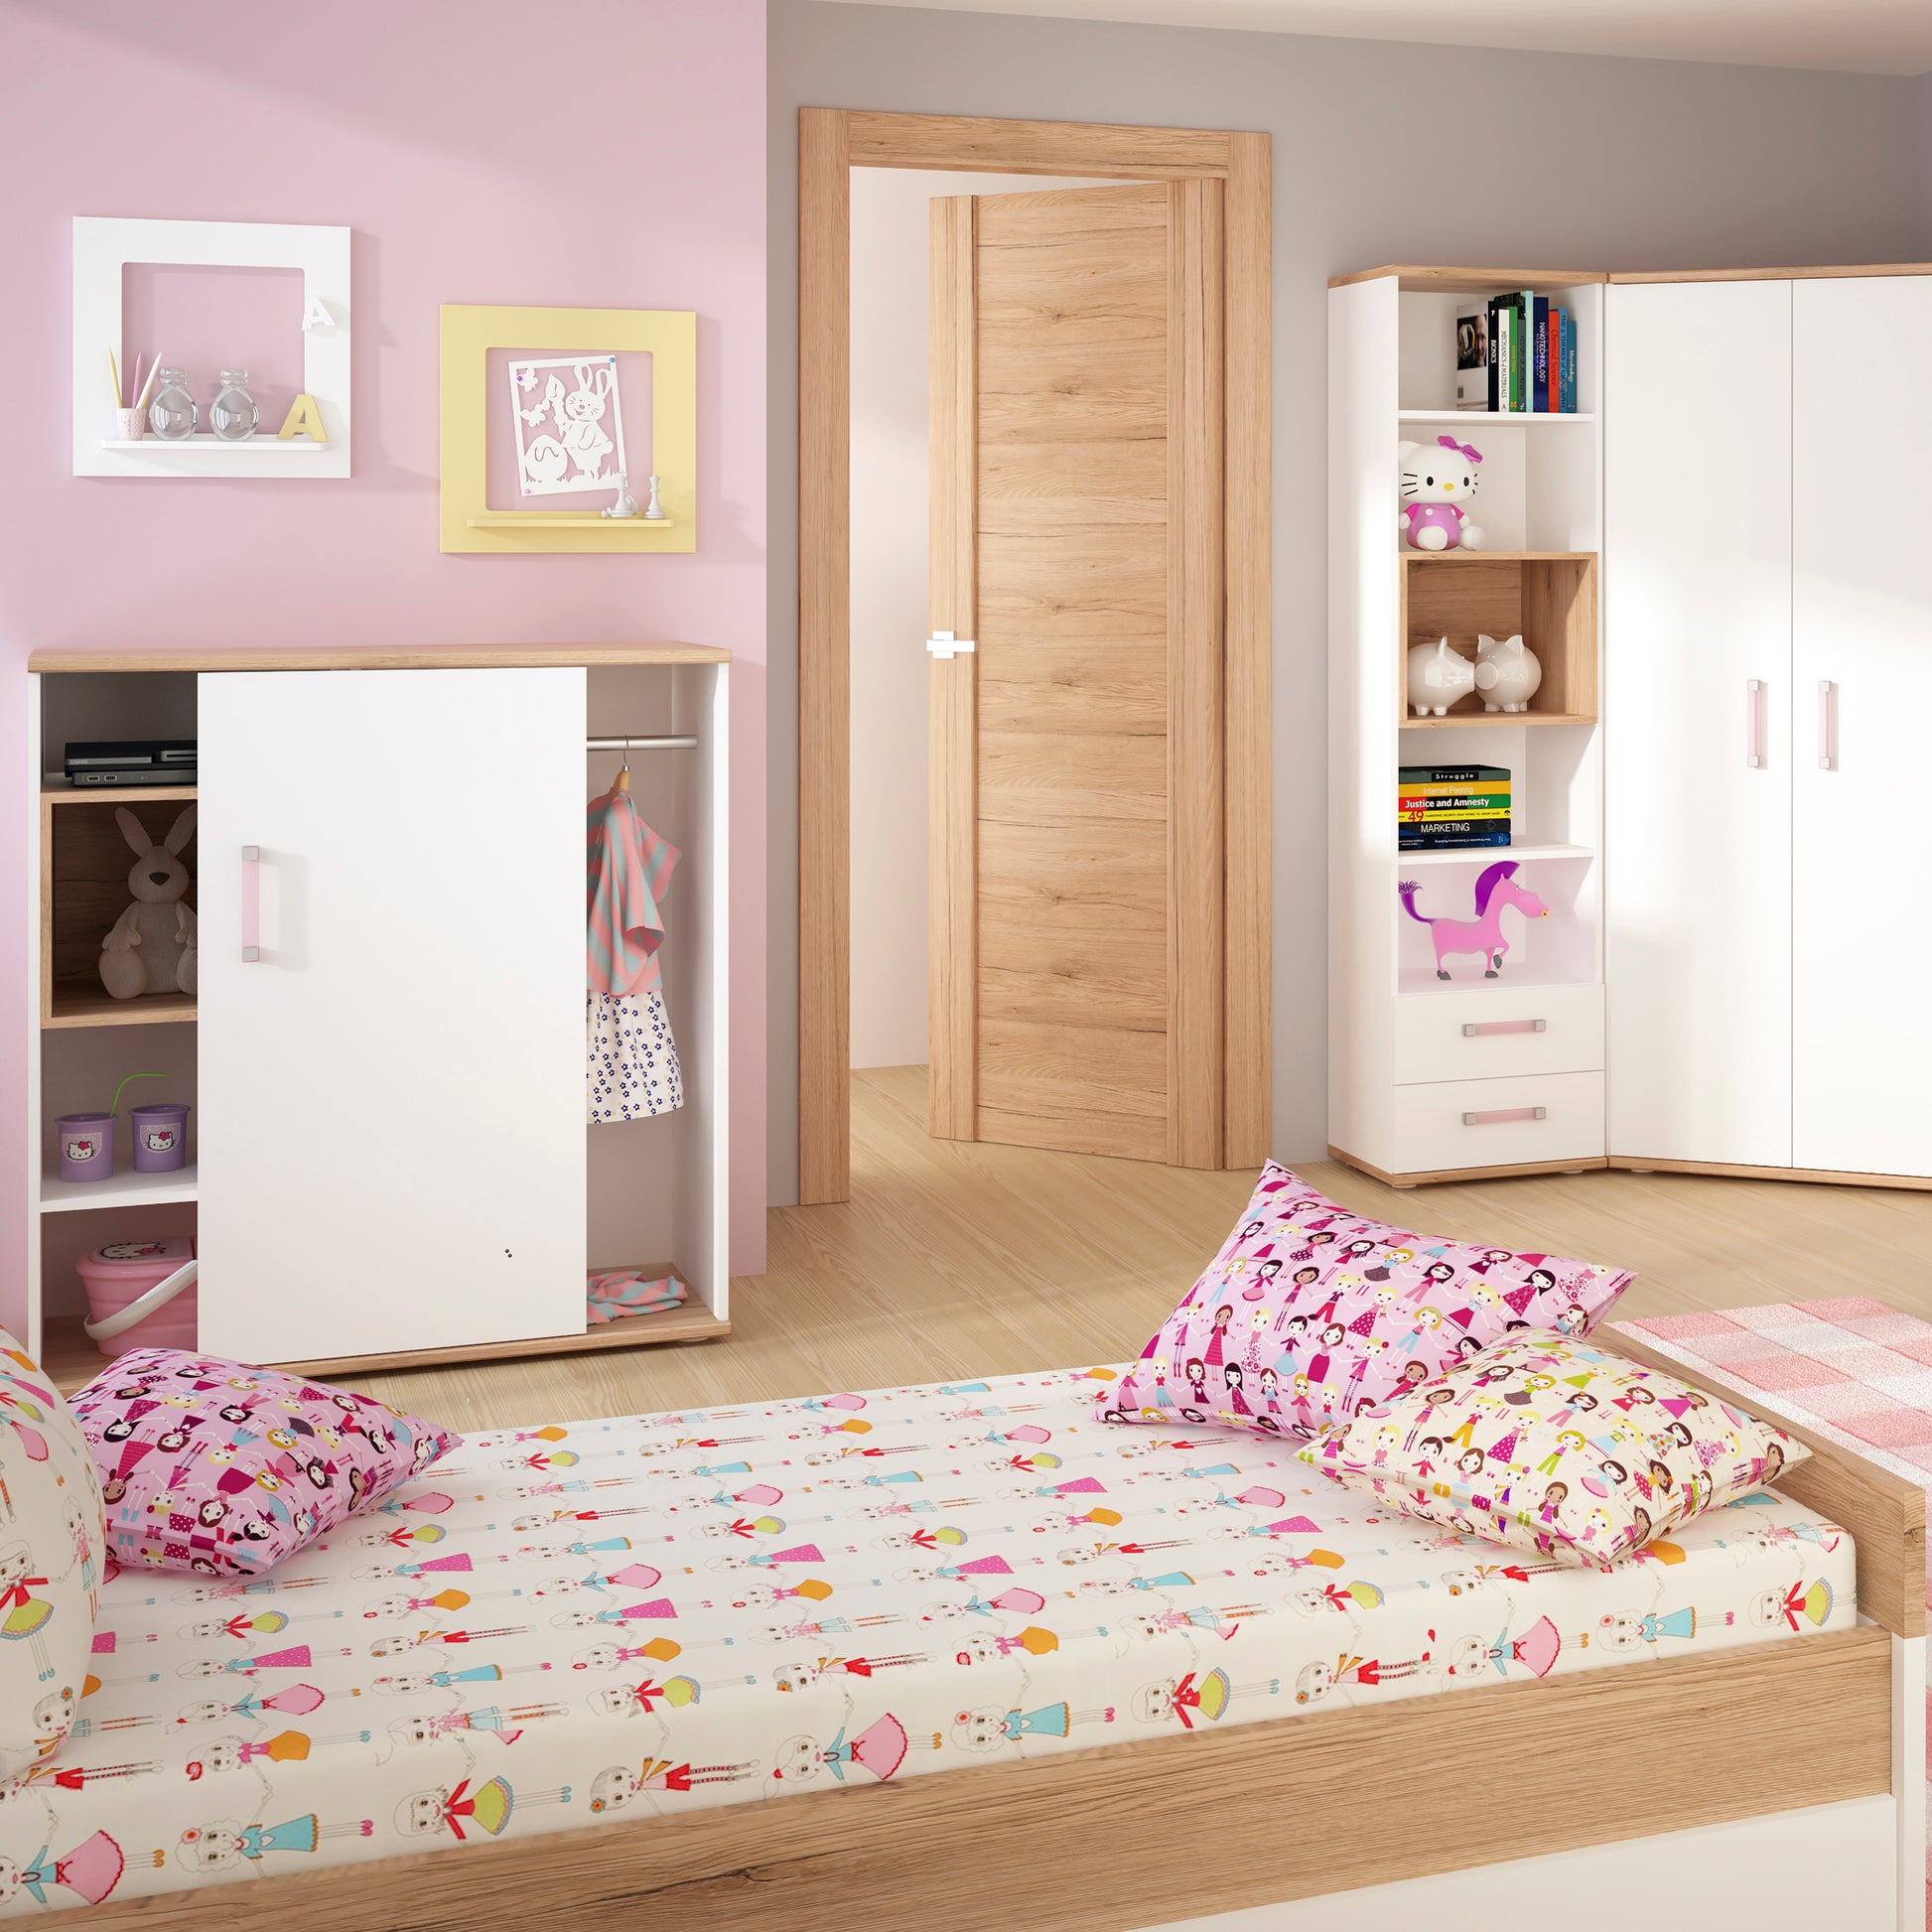 4Kids  Low Cabinet with shelves (Sliding Door) in Light Oak and white High Gloss (lilac handles)